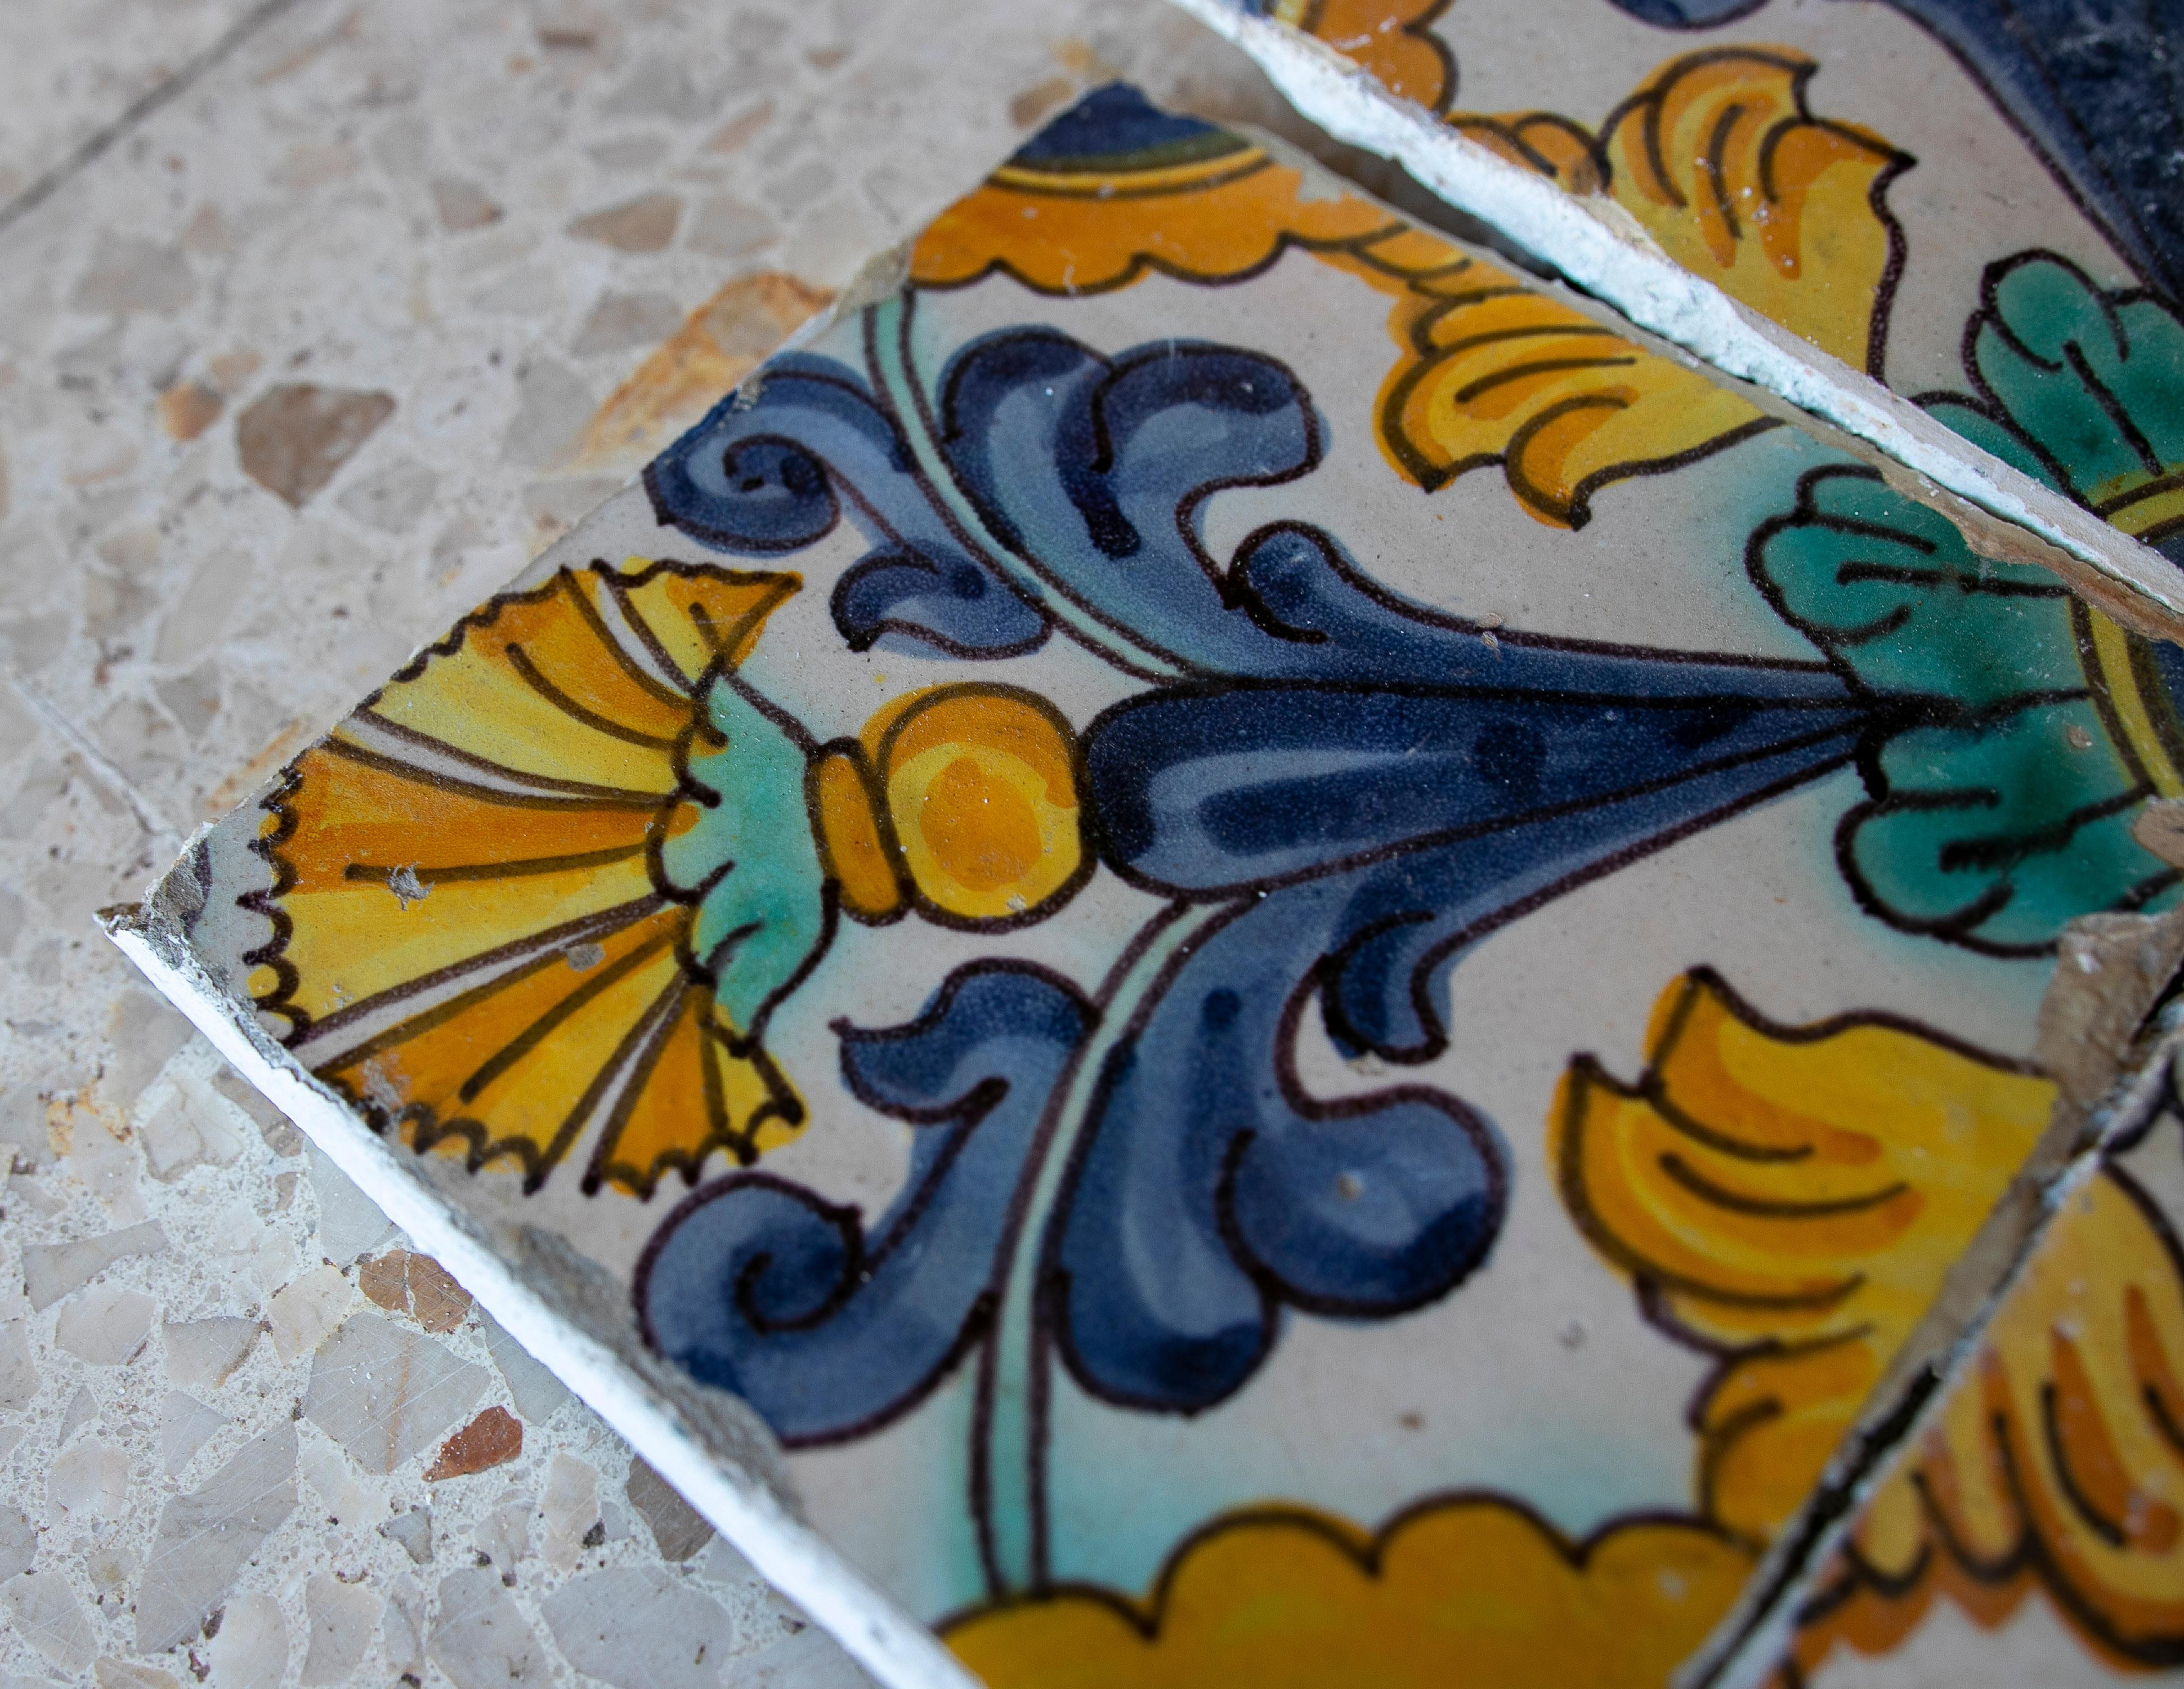 Set of 4 Mid-19th Century Spanish Hand Painted Patterned Glazed Ceramic Tiles 2